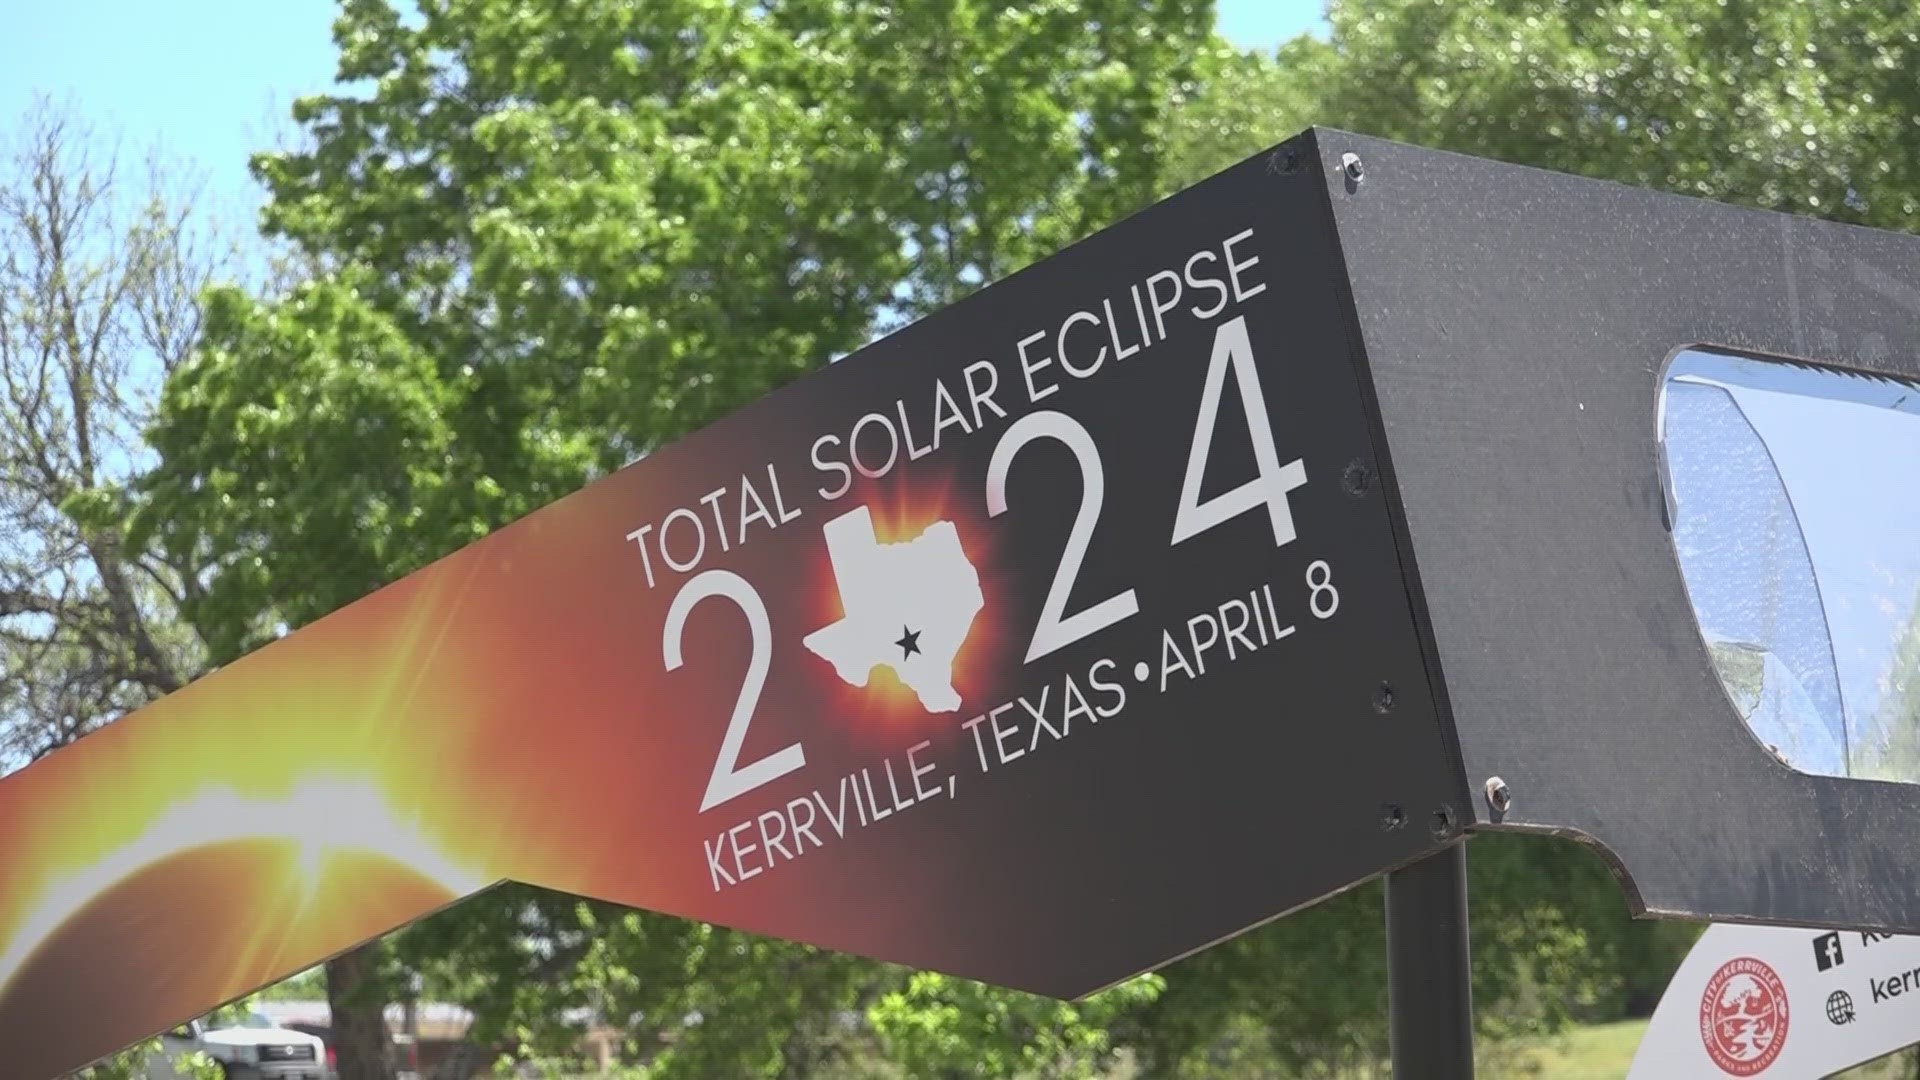 With more than 100,000 people expected to make the journey to Kerrville for the total solar eclipse, here's how businesses are getting prepared.